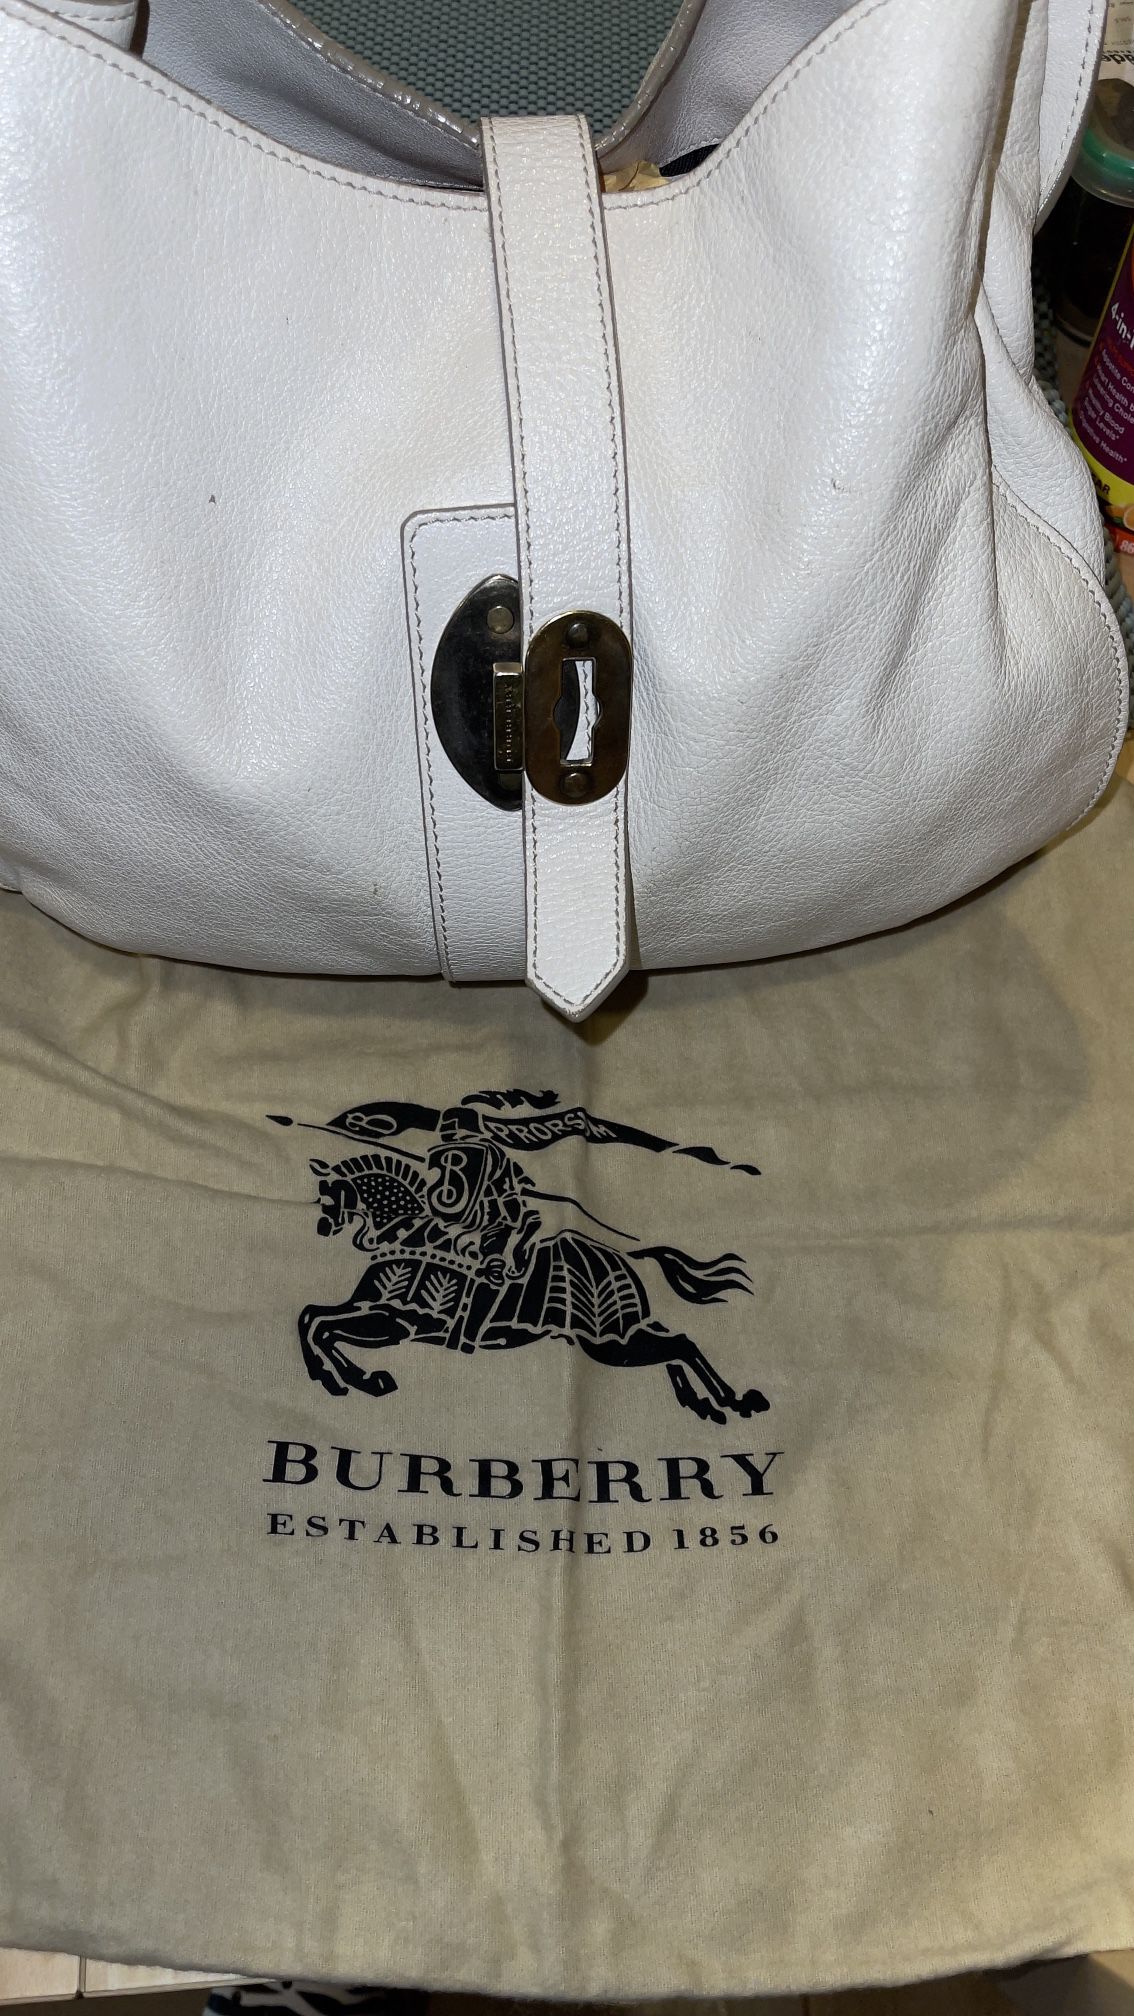 Authentic Burberry Leather Cream Color Bag